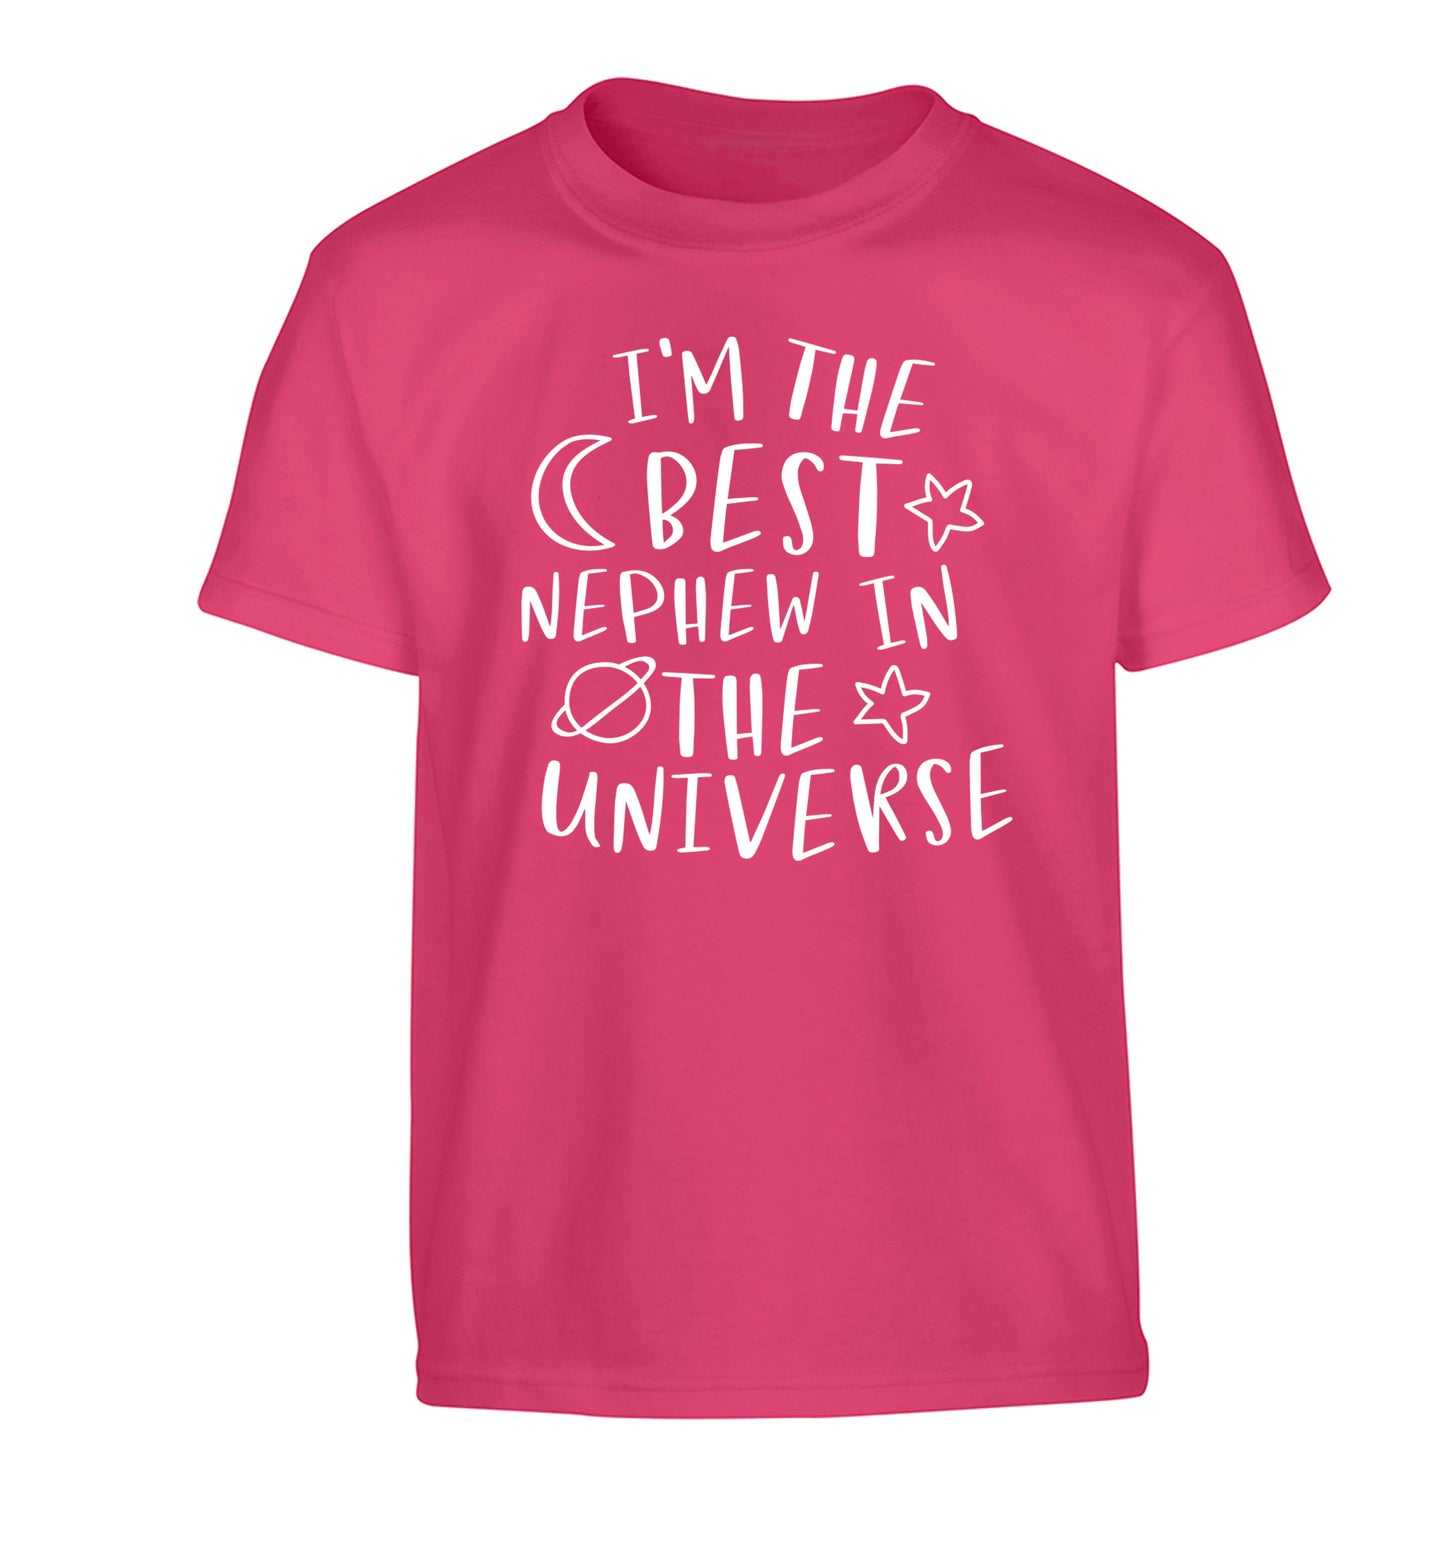 I'm the best nephew in the universe Children's pink Tshirt 12-13 Years